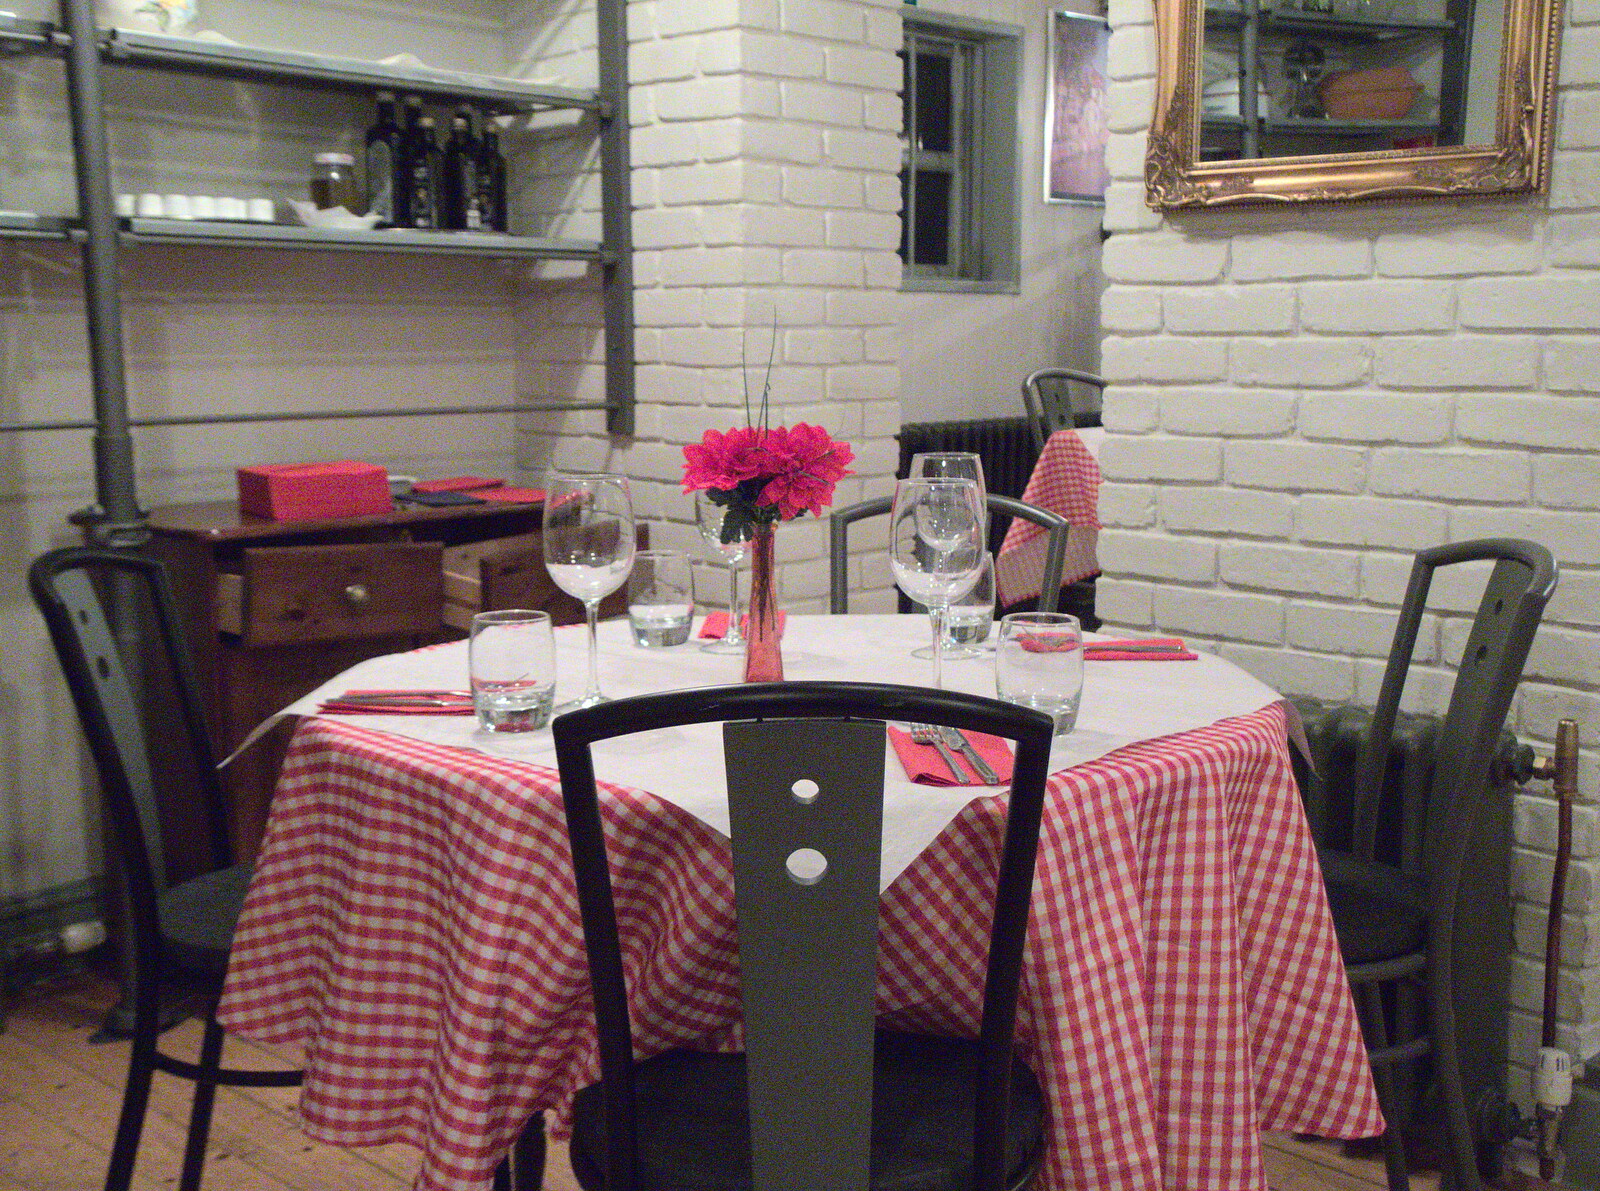 Italian restaurant table in Diss from Apples and Fireworks, Carleton Rode and Palgrave, Suffolk - 4th November 2018